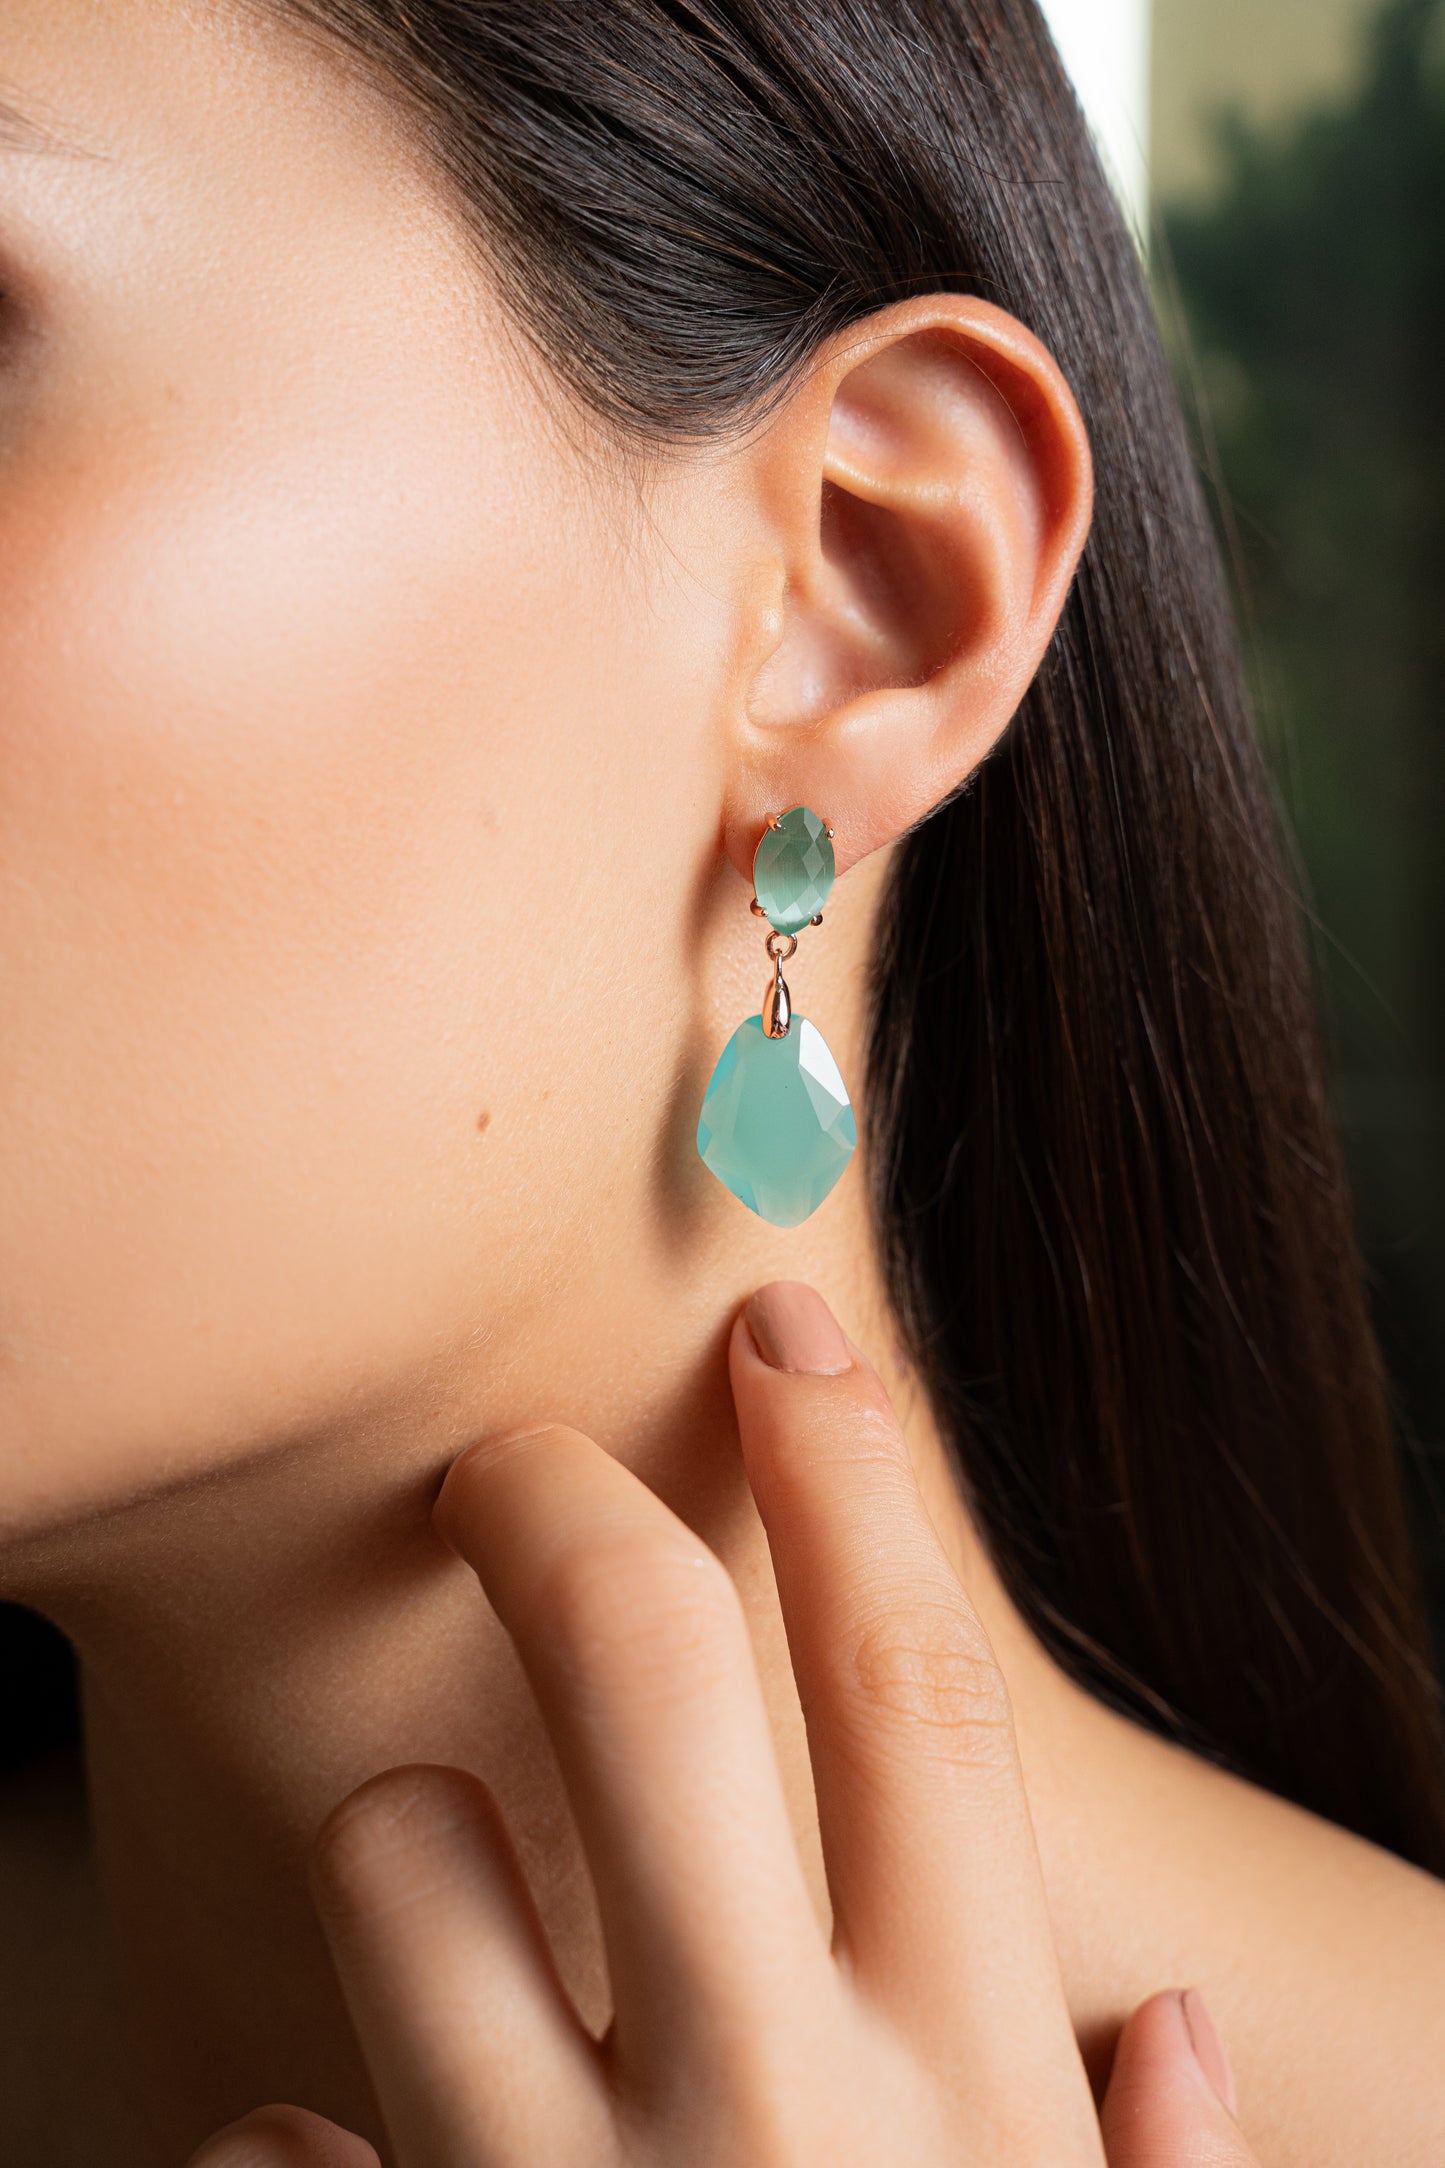 Turquoise Color Earrings Green Obsidian Inspired in The Mallorcan Sea - Nelissima Jewelry